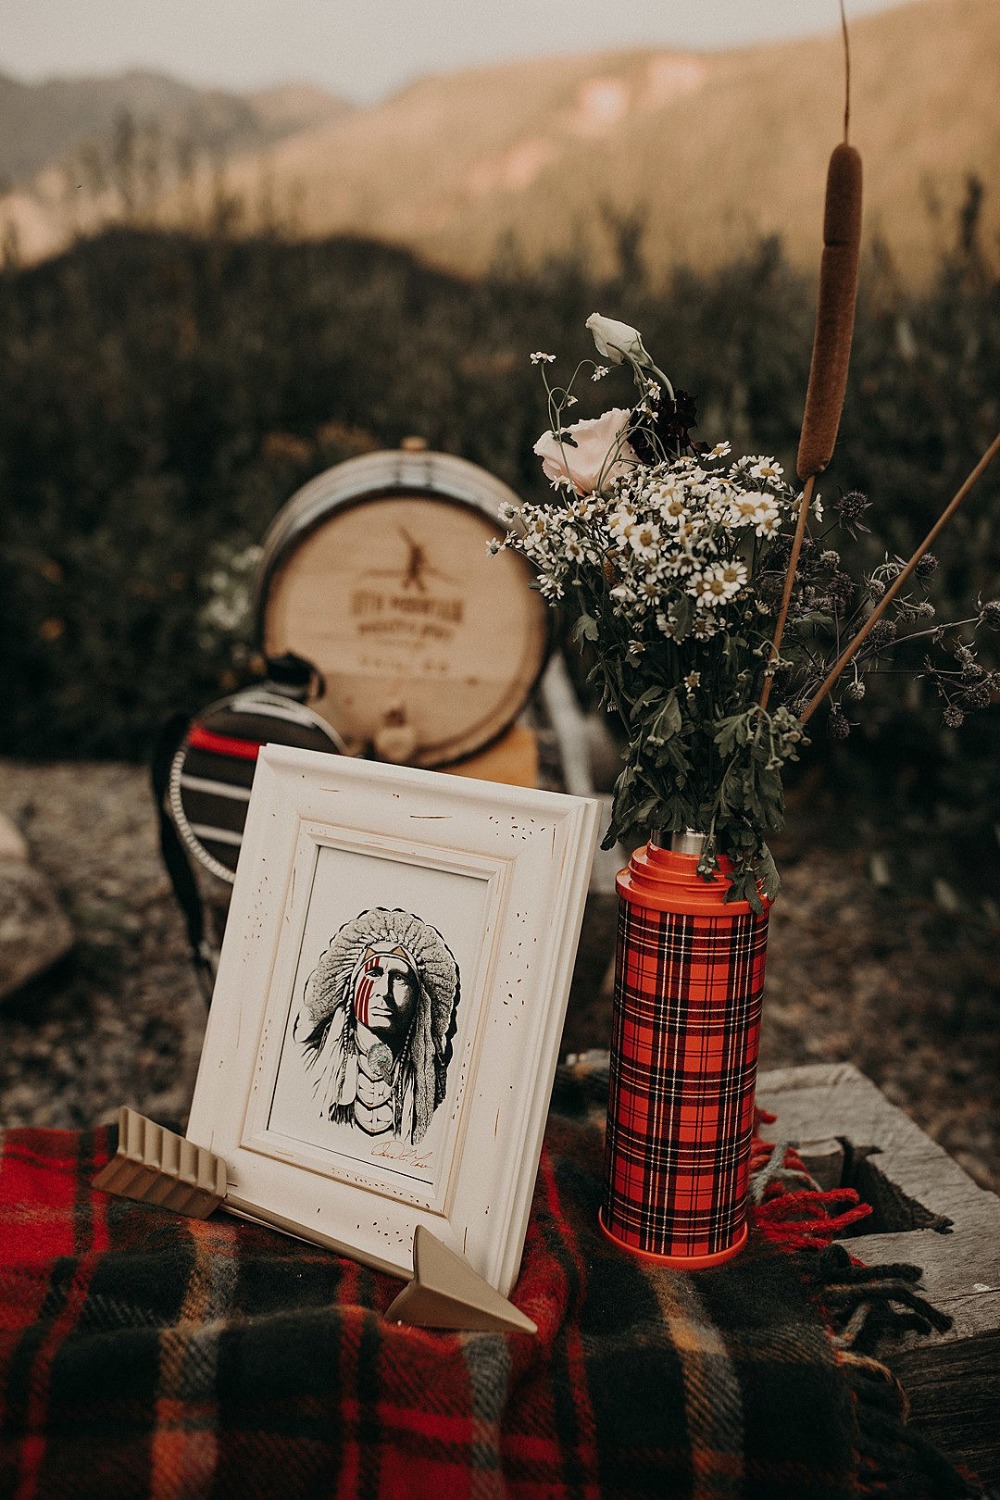 Wes Anderson themed wedding